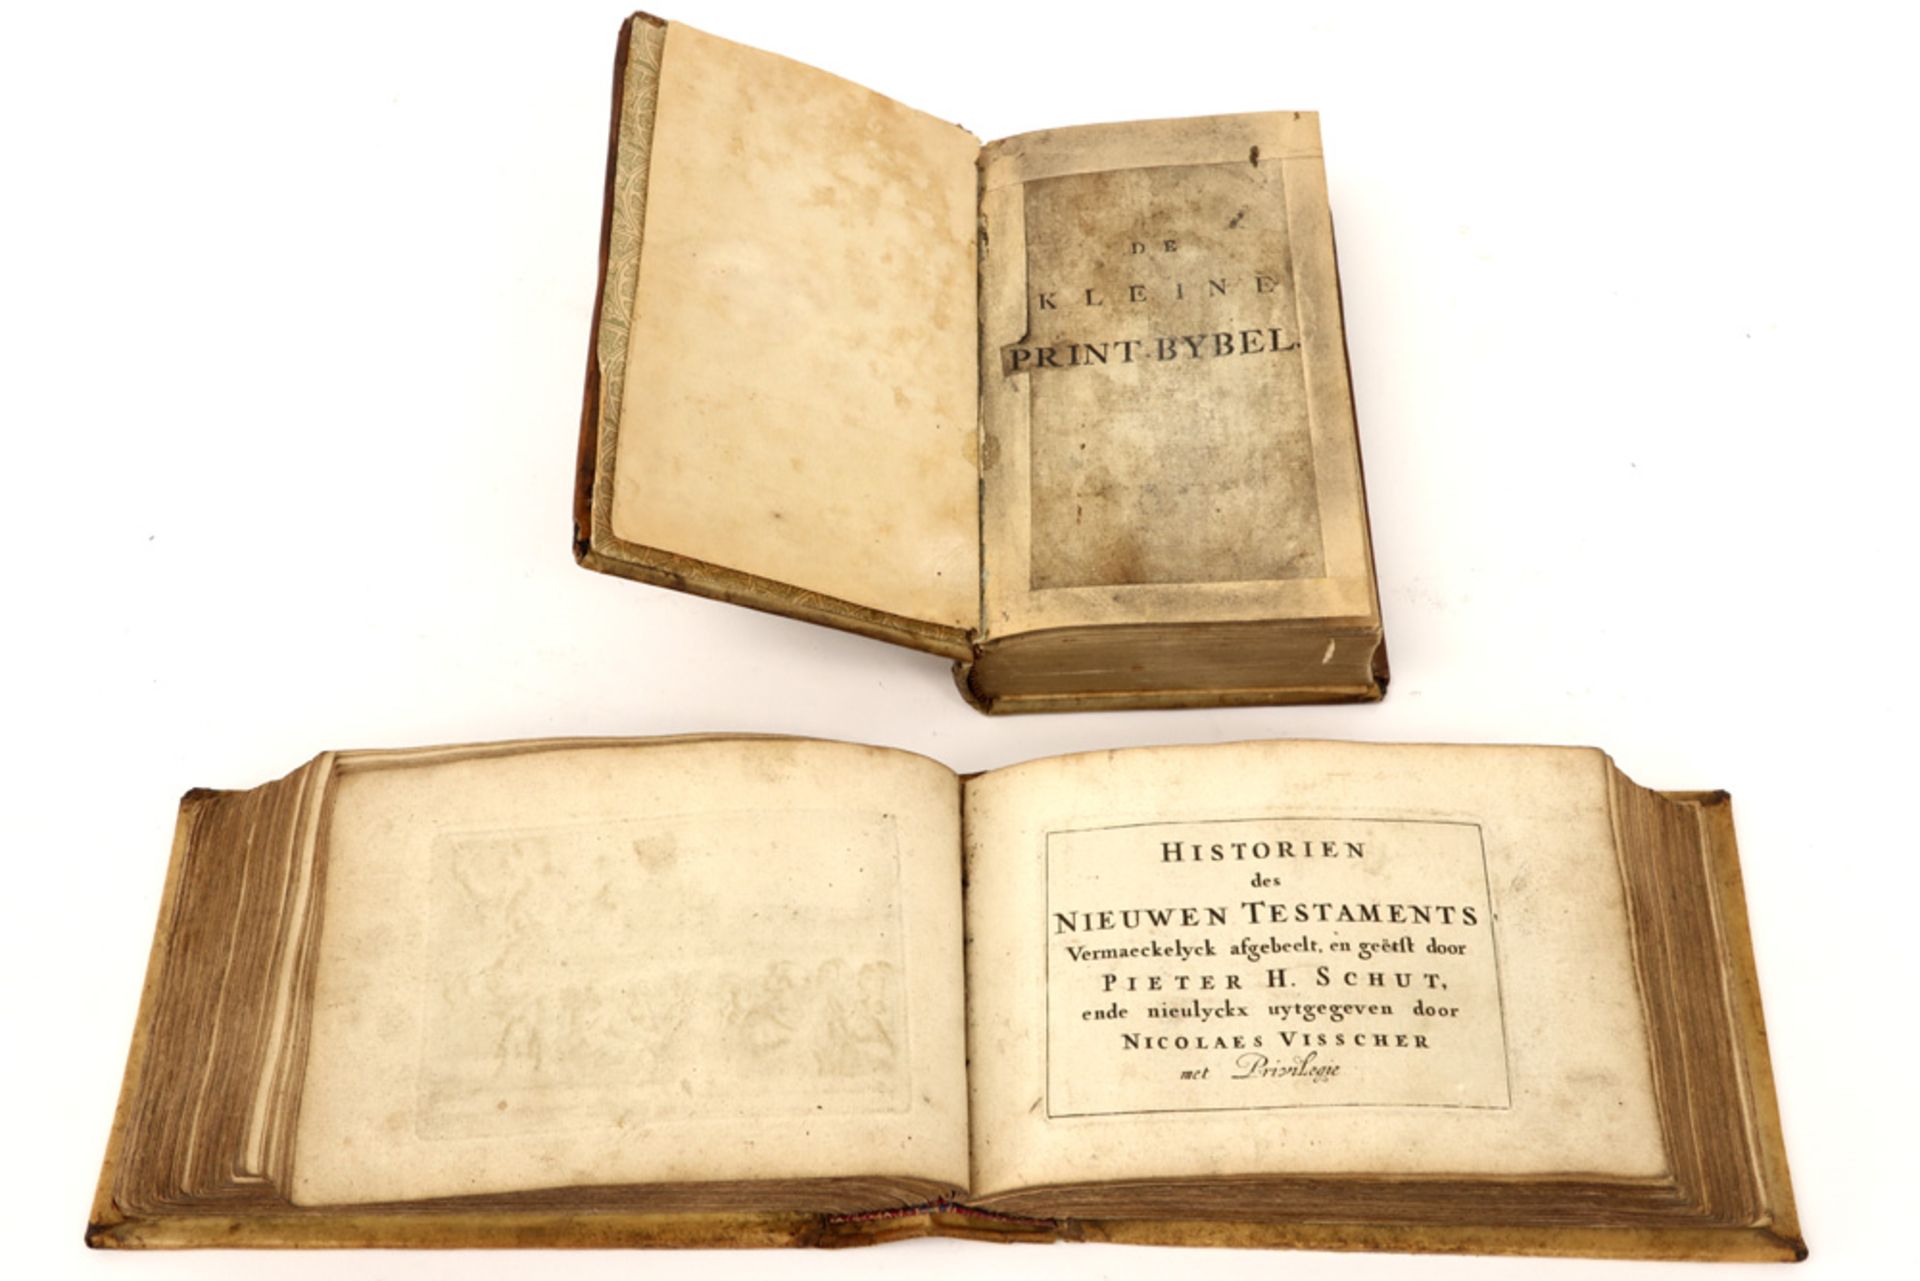 lot of two antique picture Bibles: - one published by Nicolaes Visscher with 144 (?) numbered - Image 3 of 6